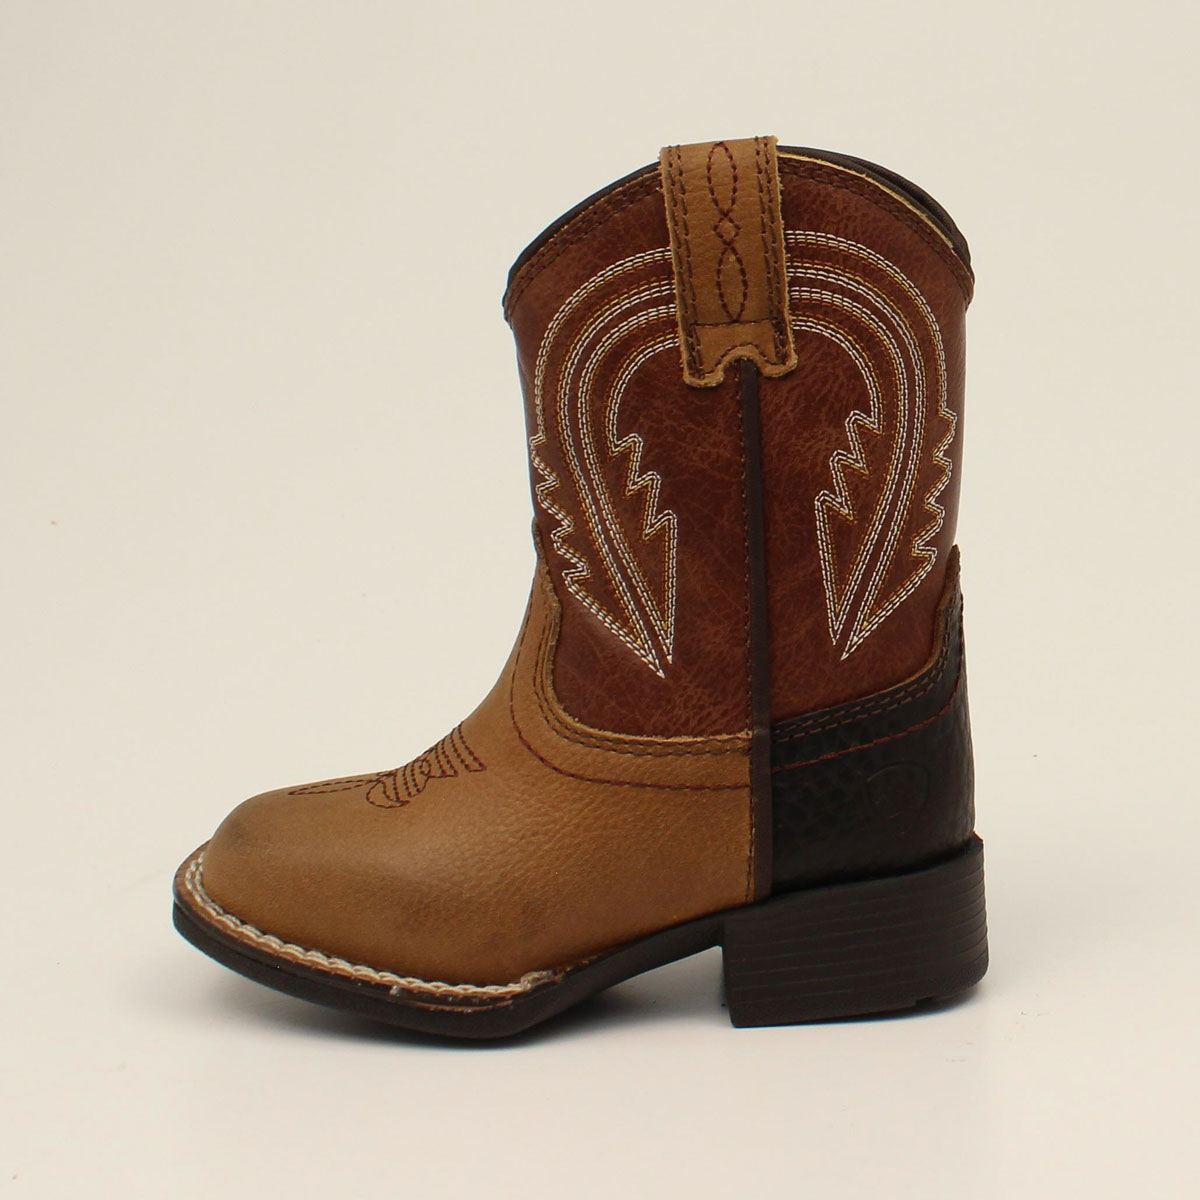 Ariat Toddler Boy's Evan Lil' Stompers Western Boots - Tan w/Brown Shaft